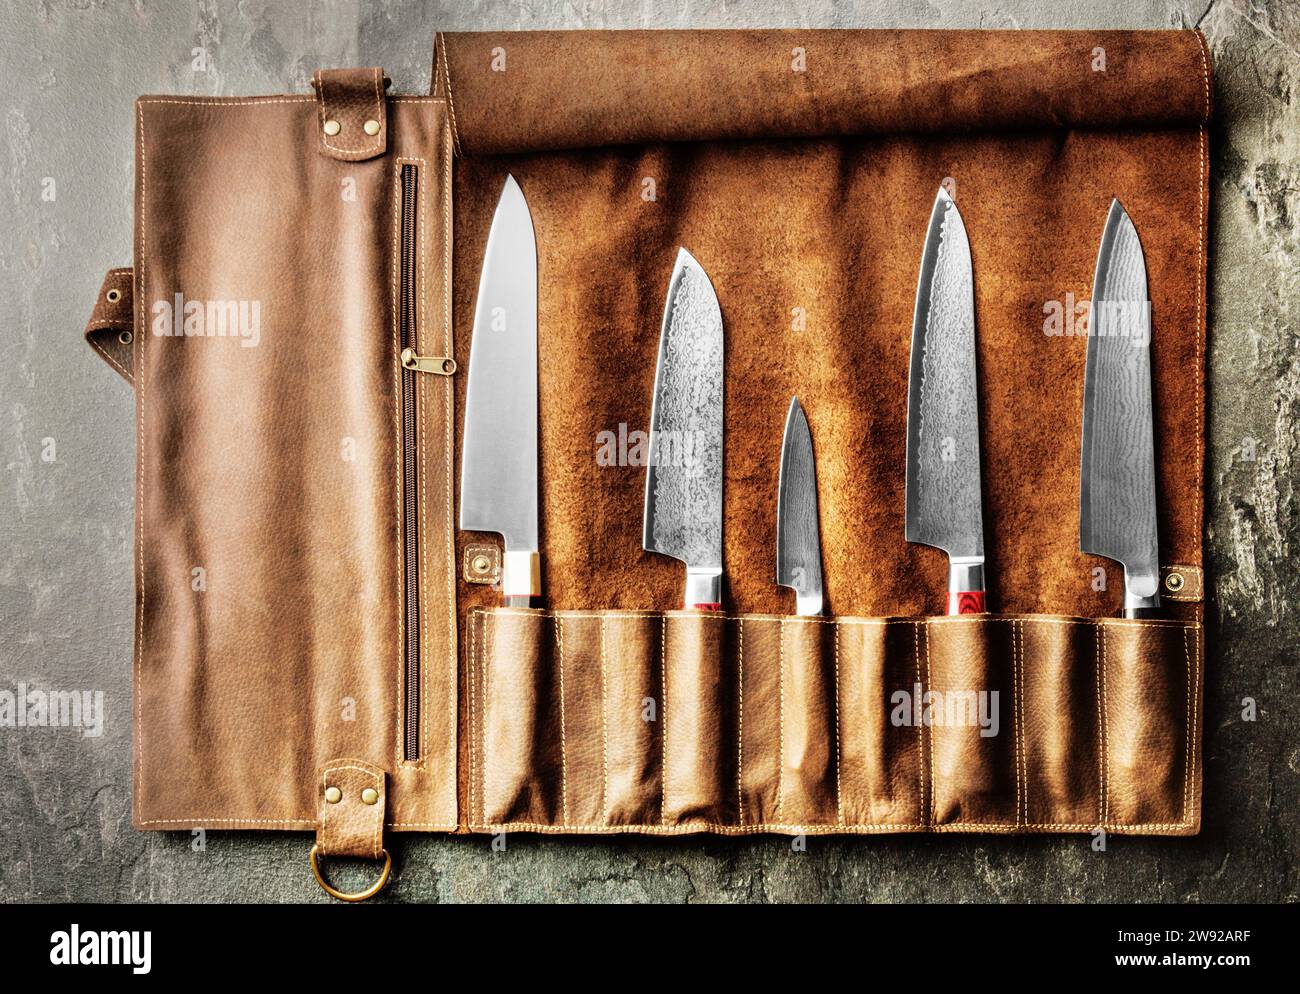 Japanese knives of different sizes from Damascus steel are in a leather case. Business concept of career growth Stock Photo